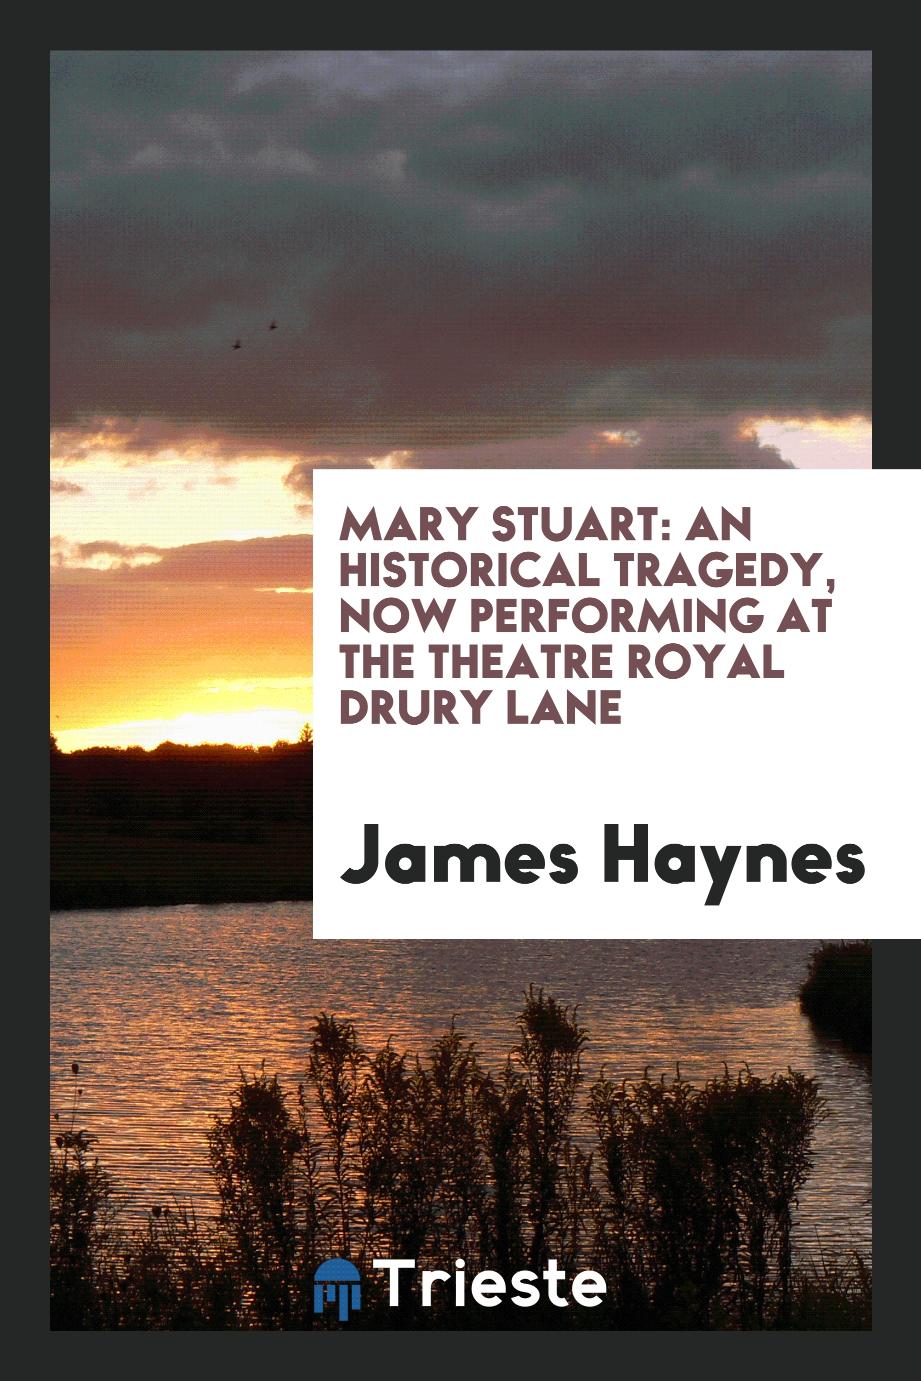 Mary Stuart: An Historical Tragedy, Now Performing at the Theatre Royal Drury Lane